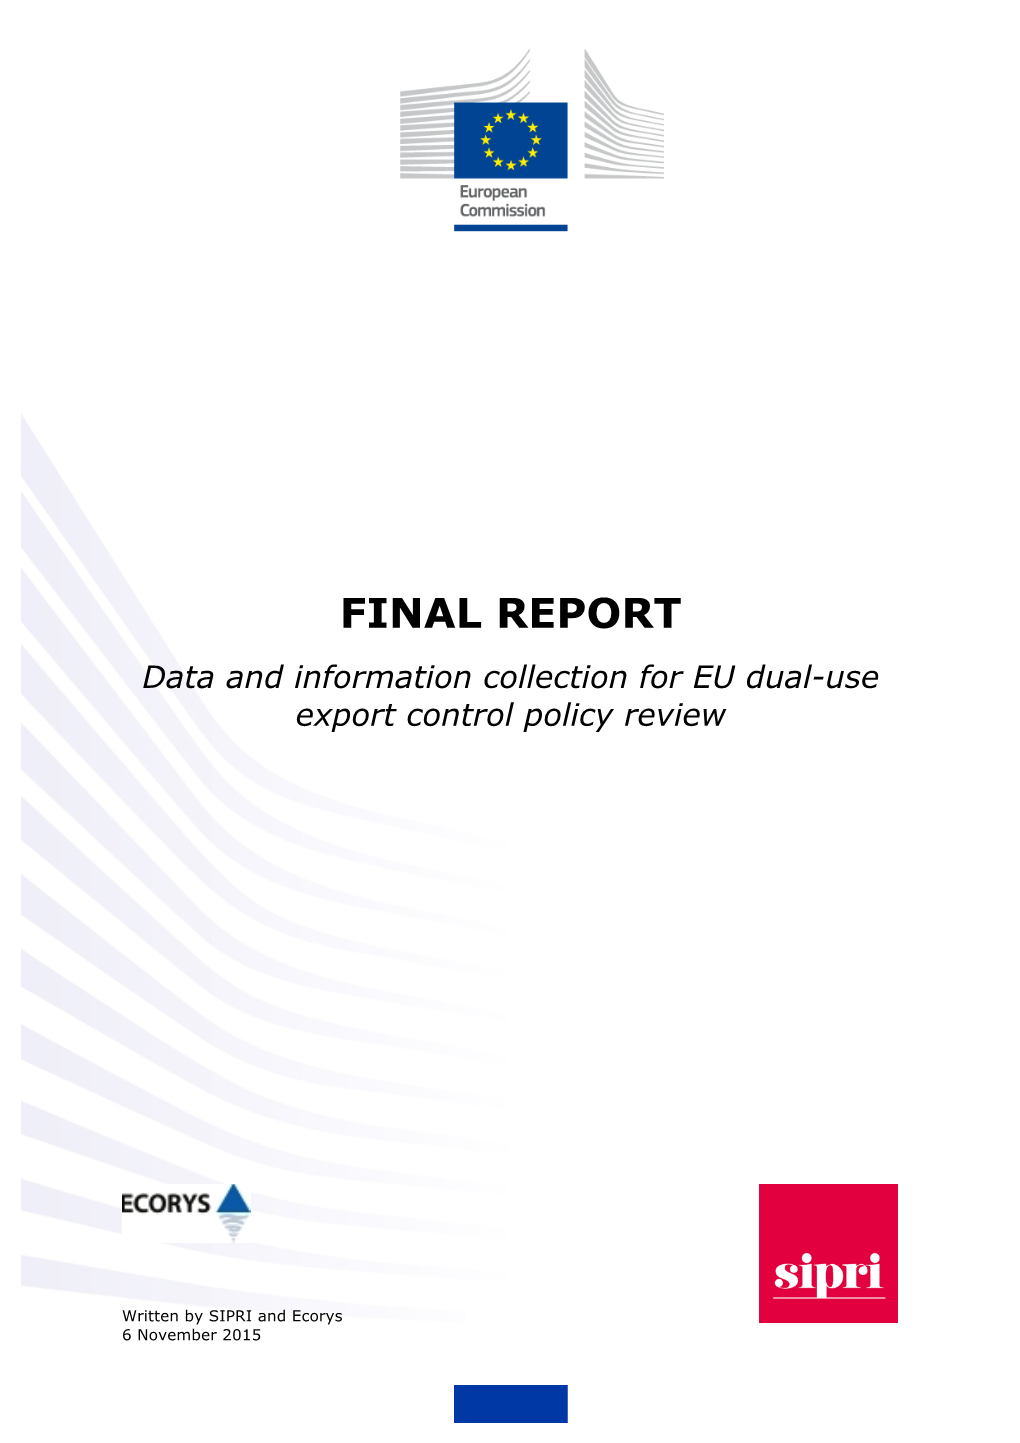 Data and Information Collection for EU Dual-Use Export Control Policy Review